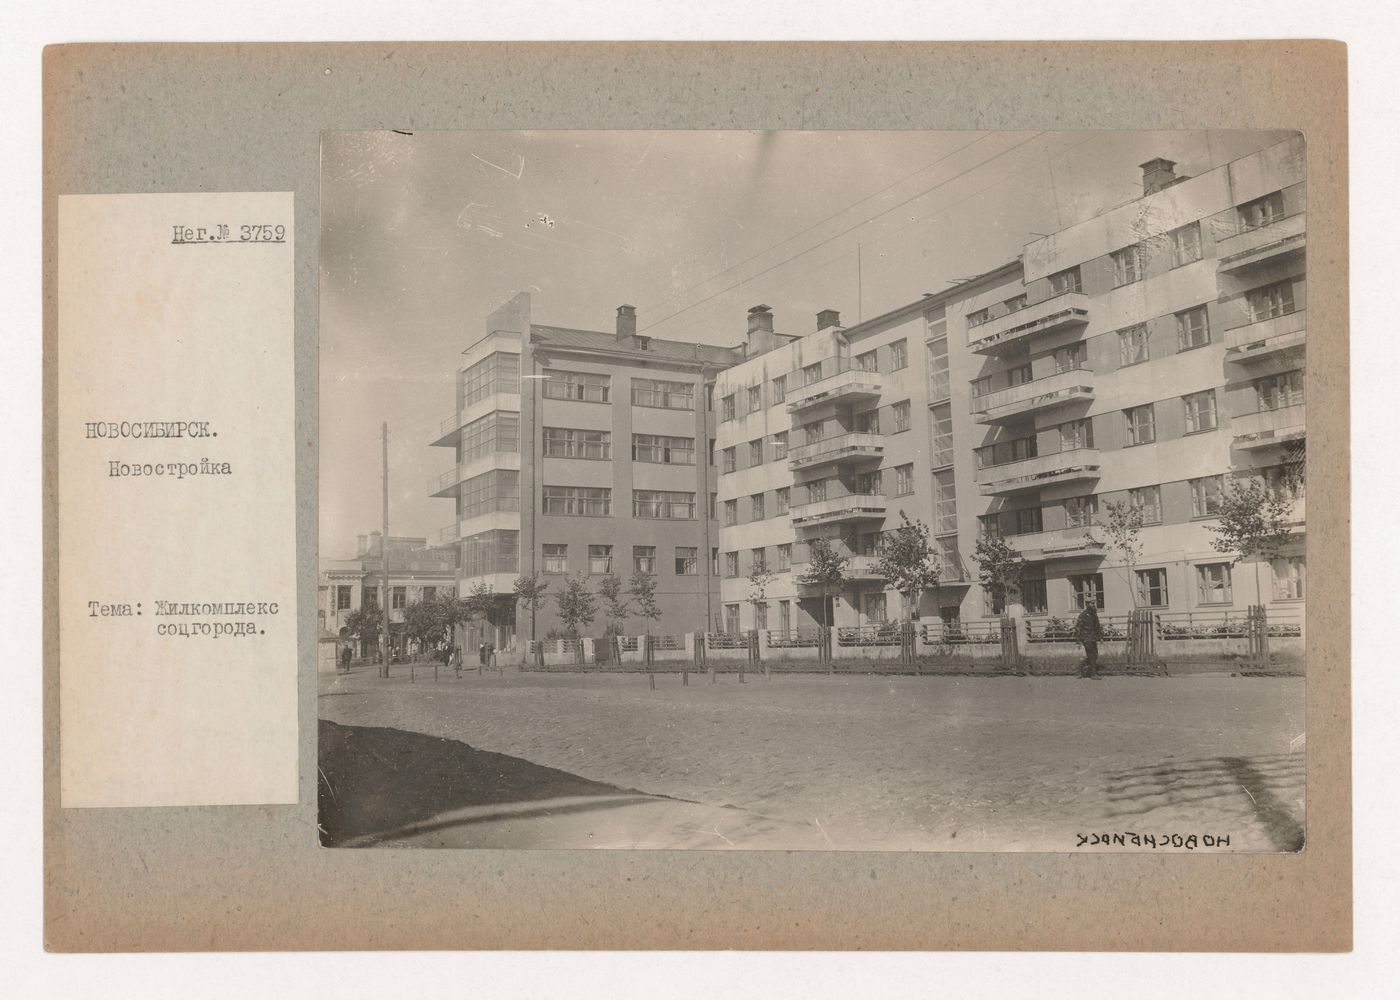 View of the Sibir' Hotel from across the street, Novosibirsk, Soviet Union (now in Russia)